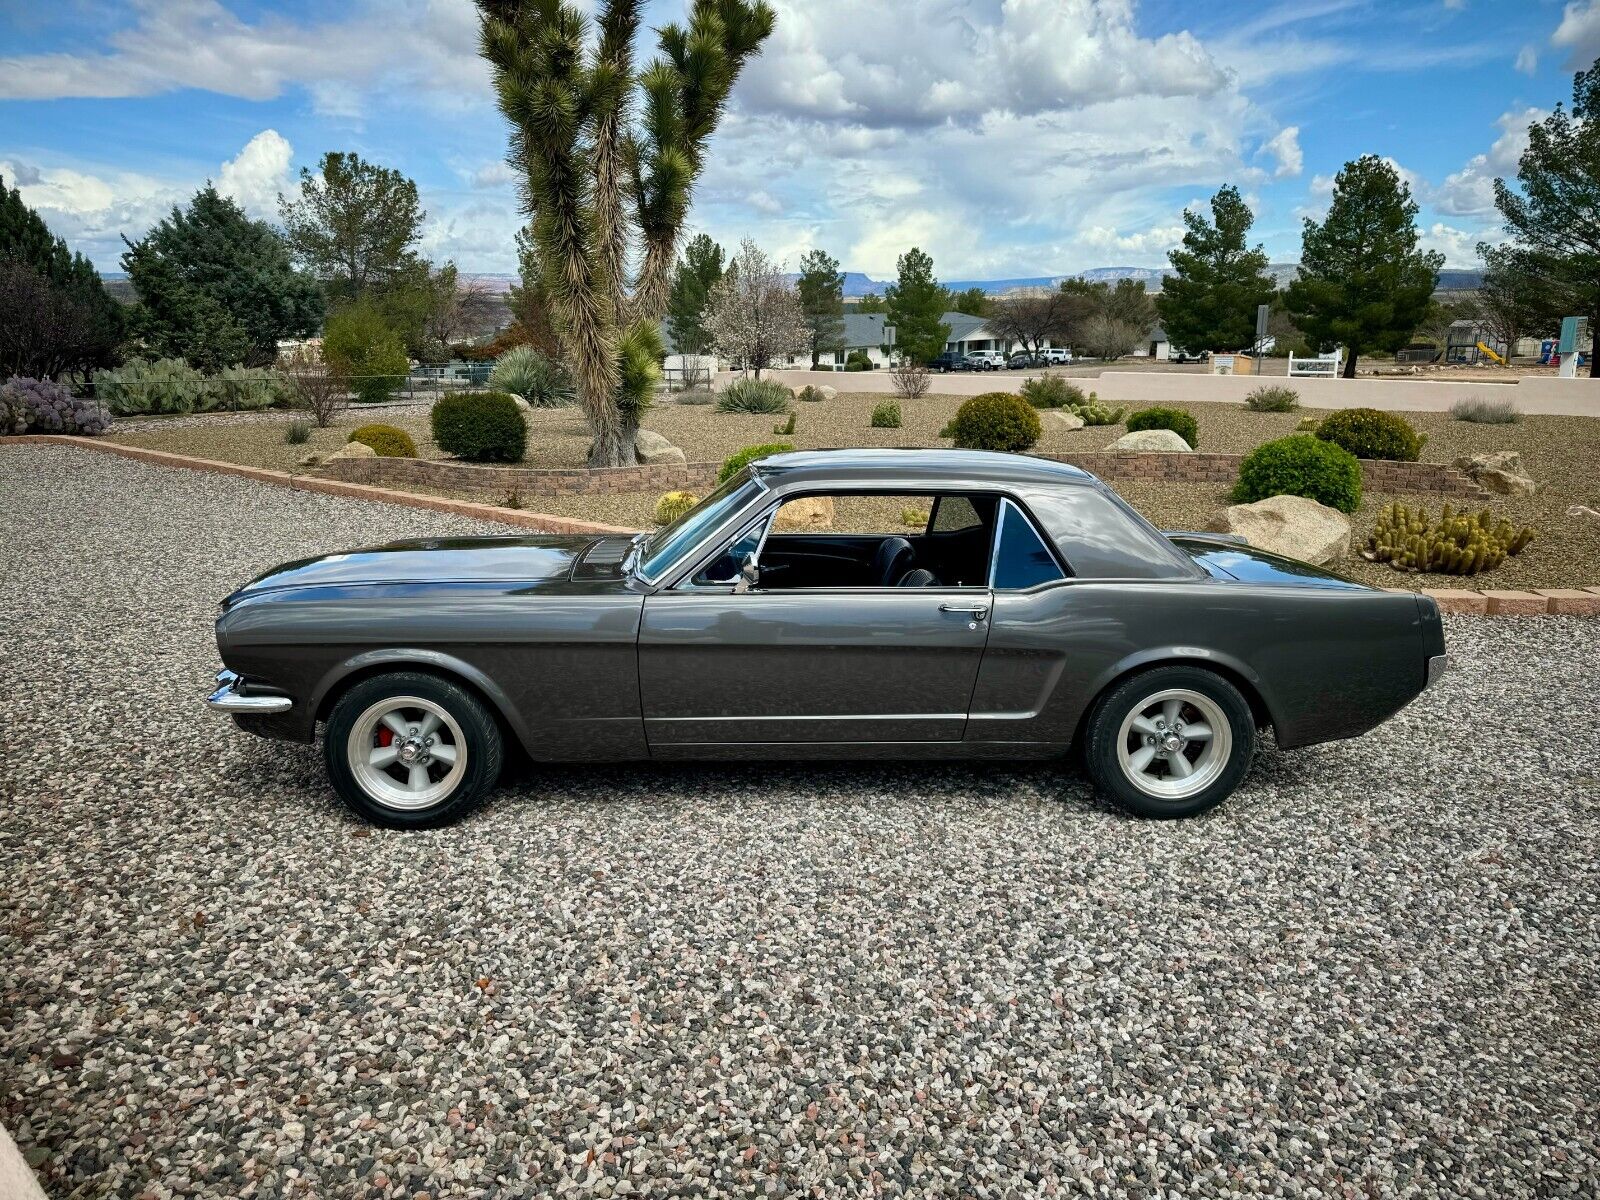 Ford Mustang Coupe 1965 à vendre